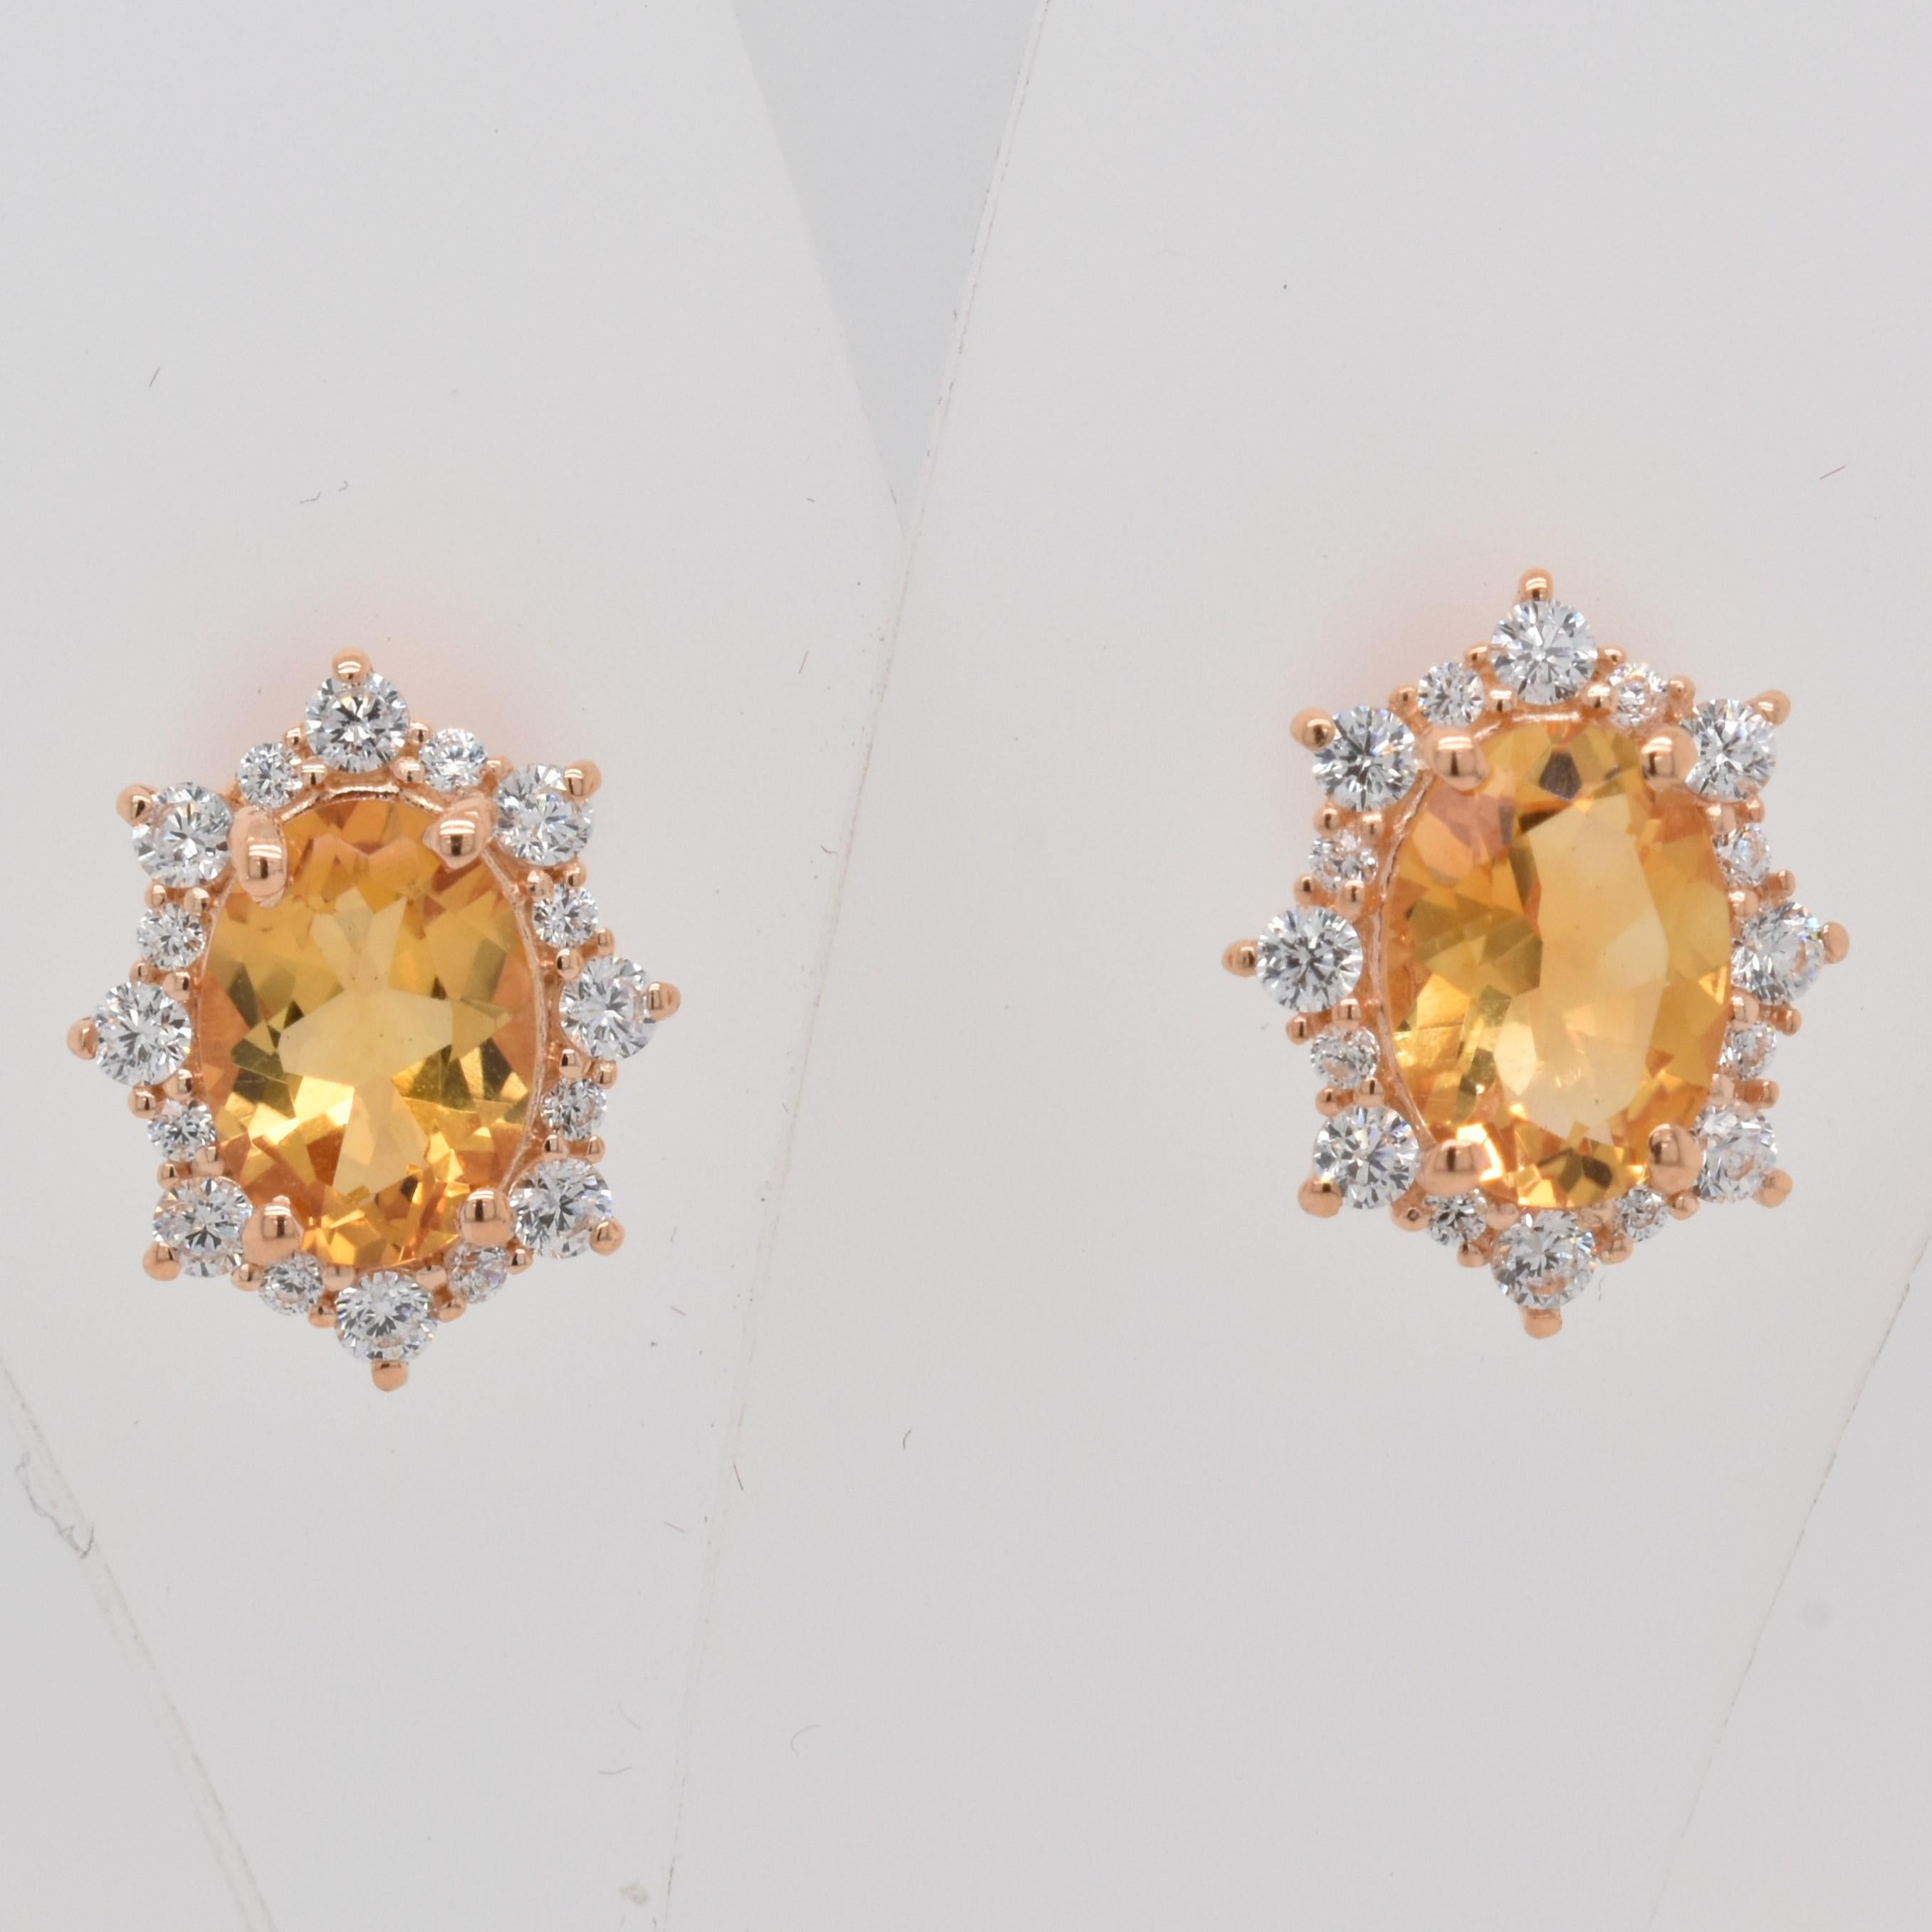 Oval Shape Citrine Gemstone And CZ beautifully crafted  in a Earrings. A fiery Yellow Color November Birthstone. For a special occasion like Engagement or Proposal or may be as a gift for a special person.

Primary Stone Size - 7x5mm